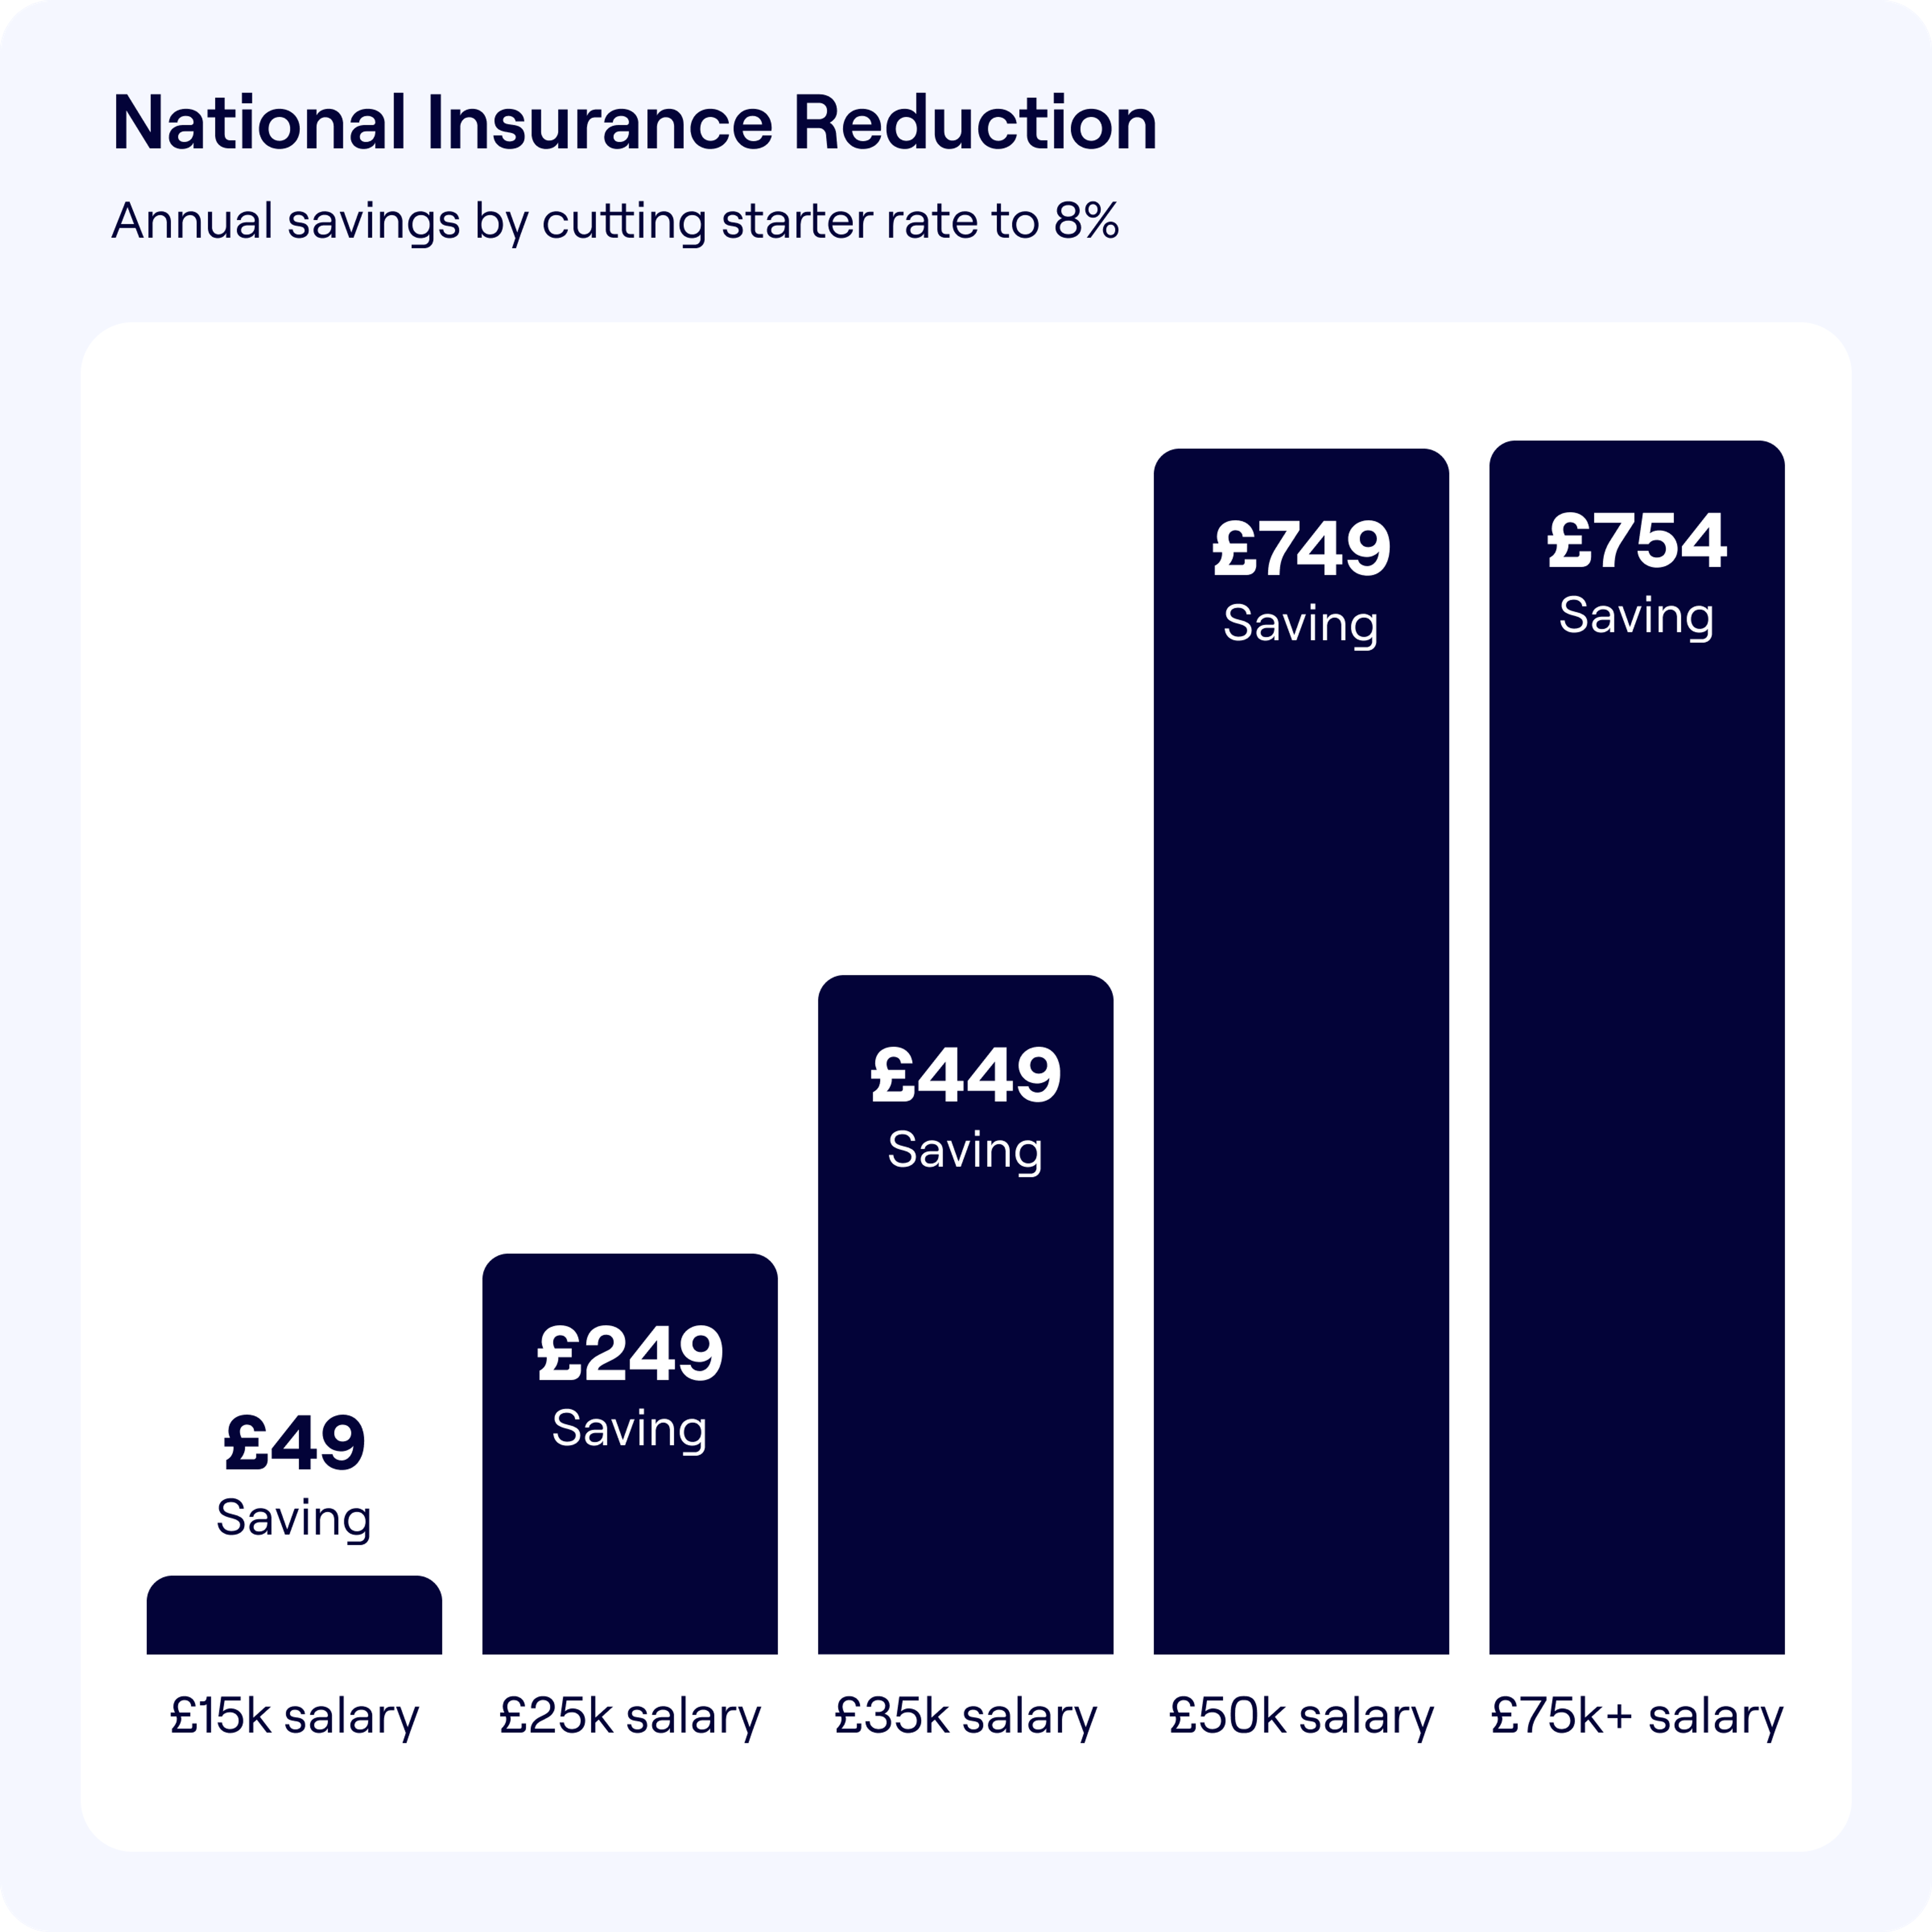 An infographic titled 'National Insurance Reduction' shows annual savings from cutting the starter rate to 8%. A series of bars represent savings at different salary levels: £49 for £15k salary, £249 for £25k salary, £449 for £35k salary, £749 for £50k salary, and £754 for £75k+ salary. 